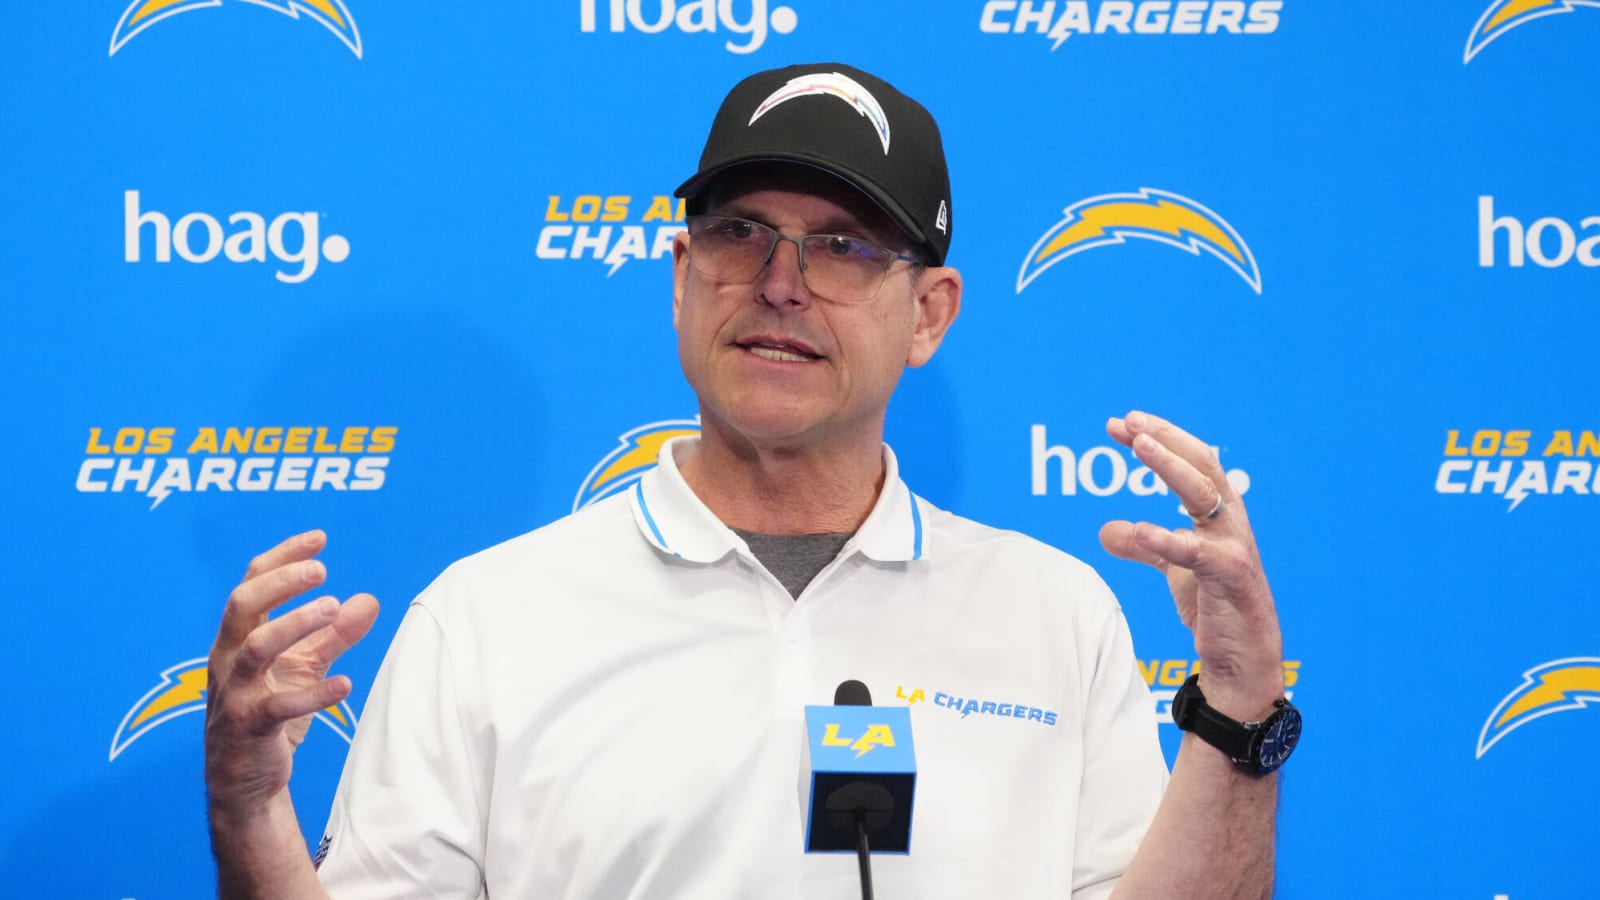 Chargers’ Jim Harbaugh Gets Brutally Honest On New Coaching Job